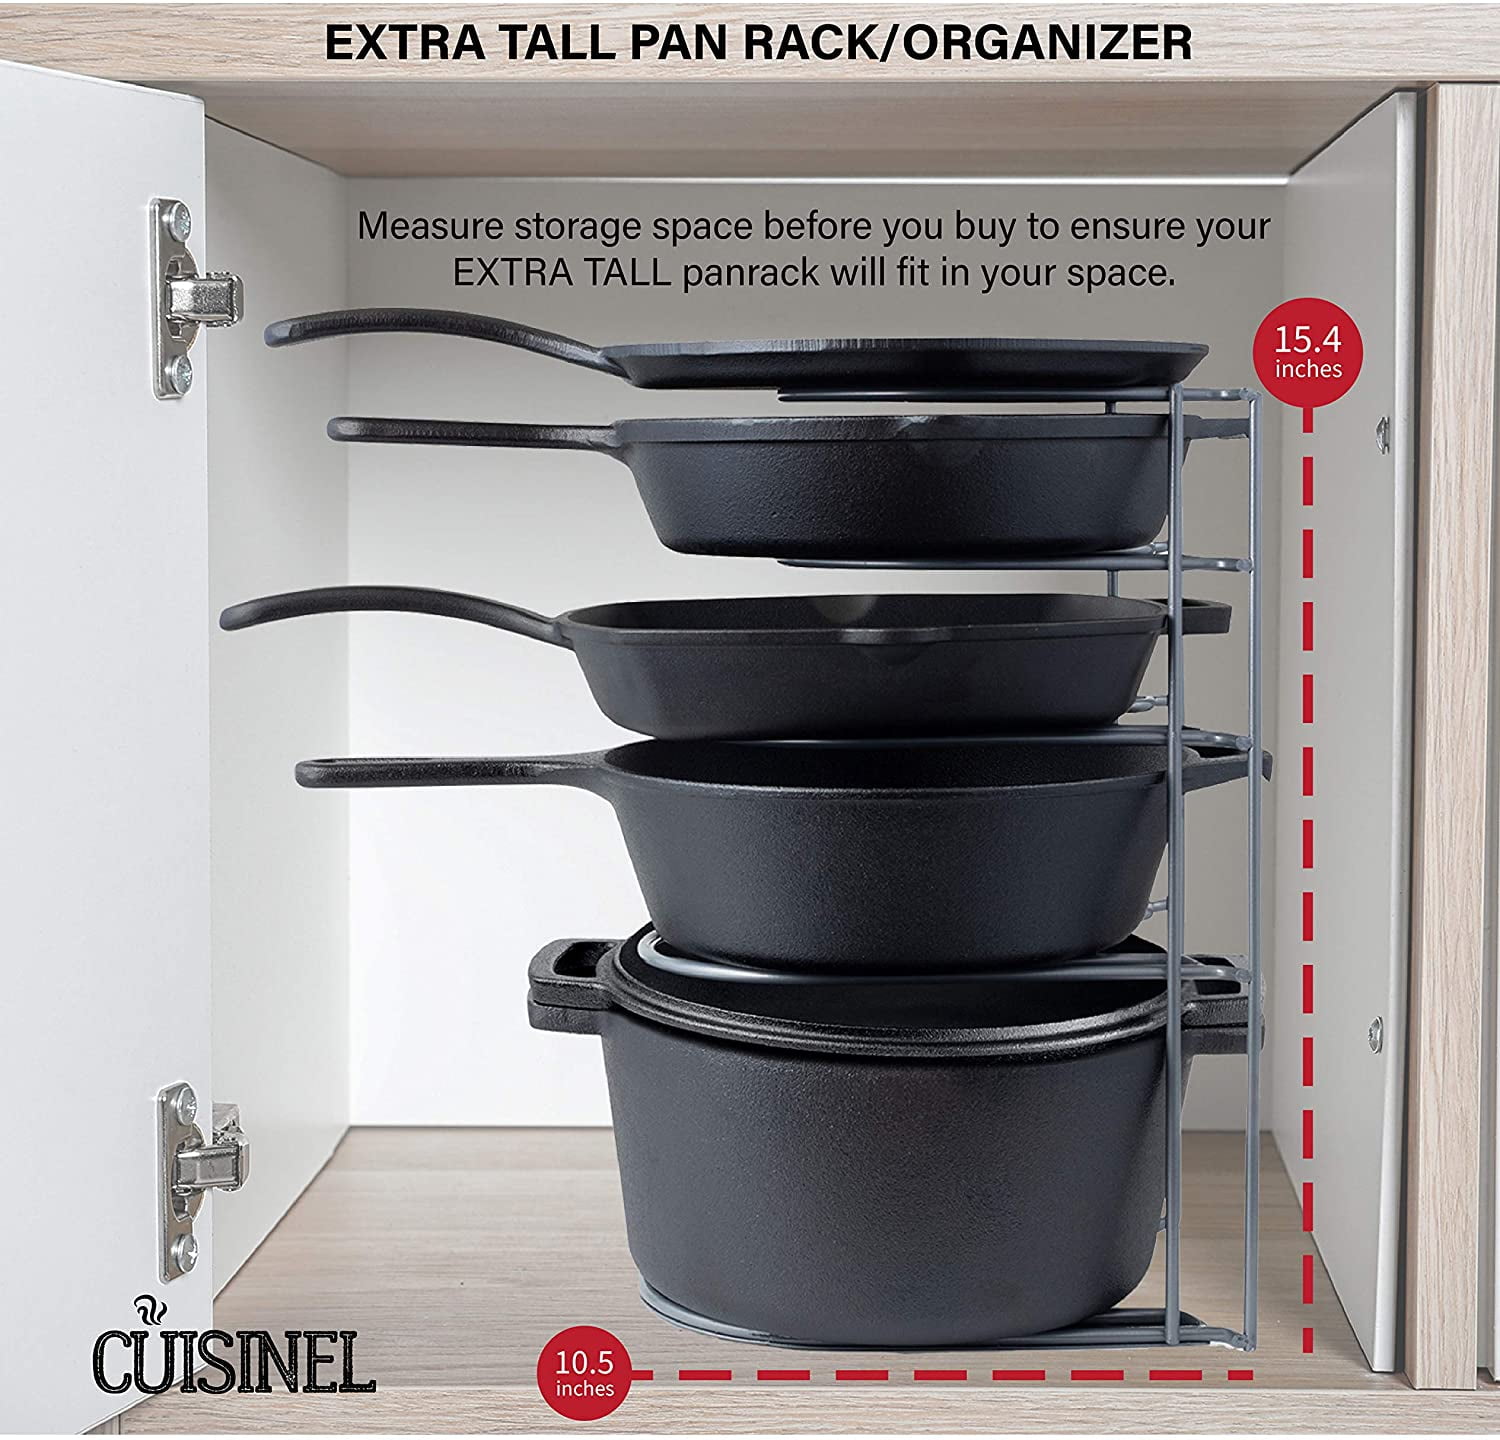 Griddles and Shallow Pots Durable Steel Construction 5 Tier Rack Holds Cast Iron Skillets cuisinel Heavy Duty Pan Organizer Space Saving Kitchen Storage Black 